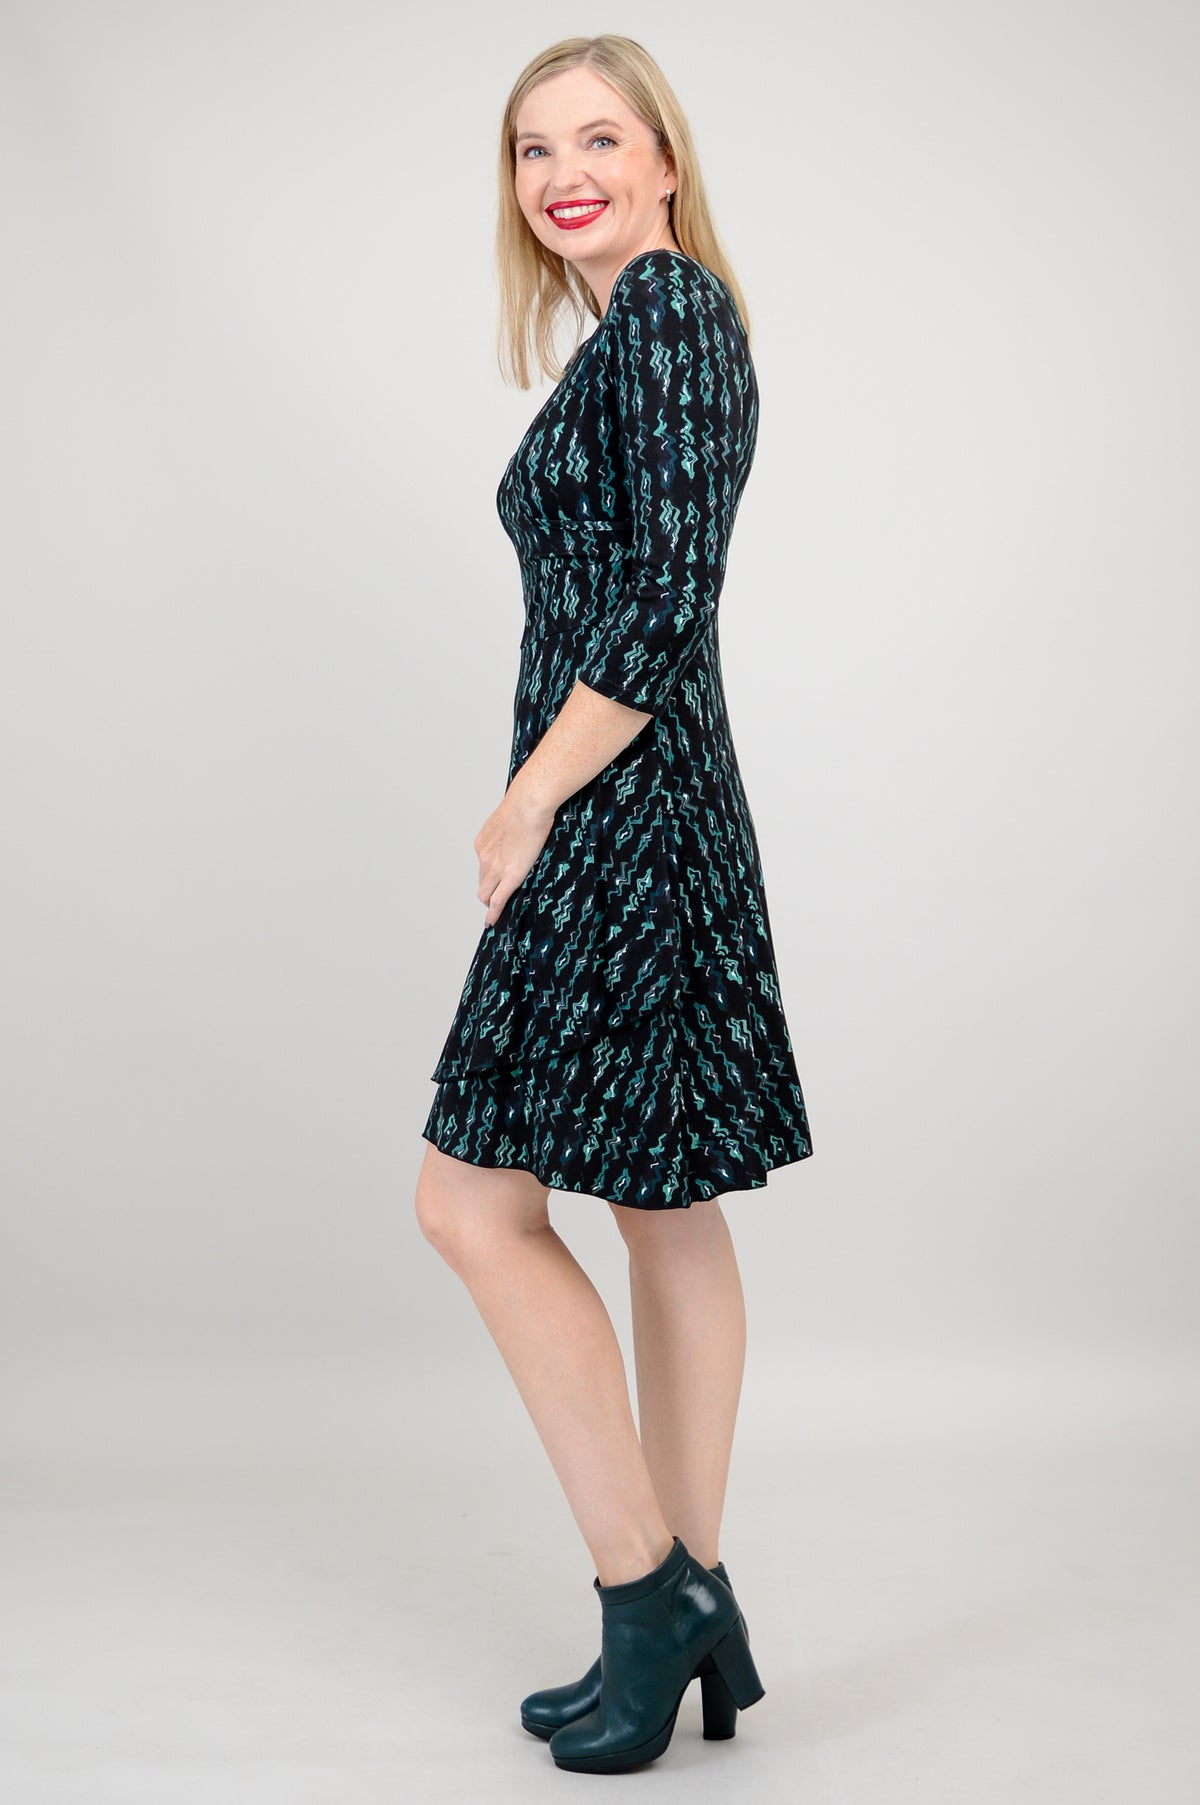 Suzanne 3/4 Slv Dress, Teal Abstract, Bamboo - Final Sale